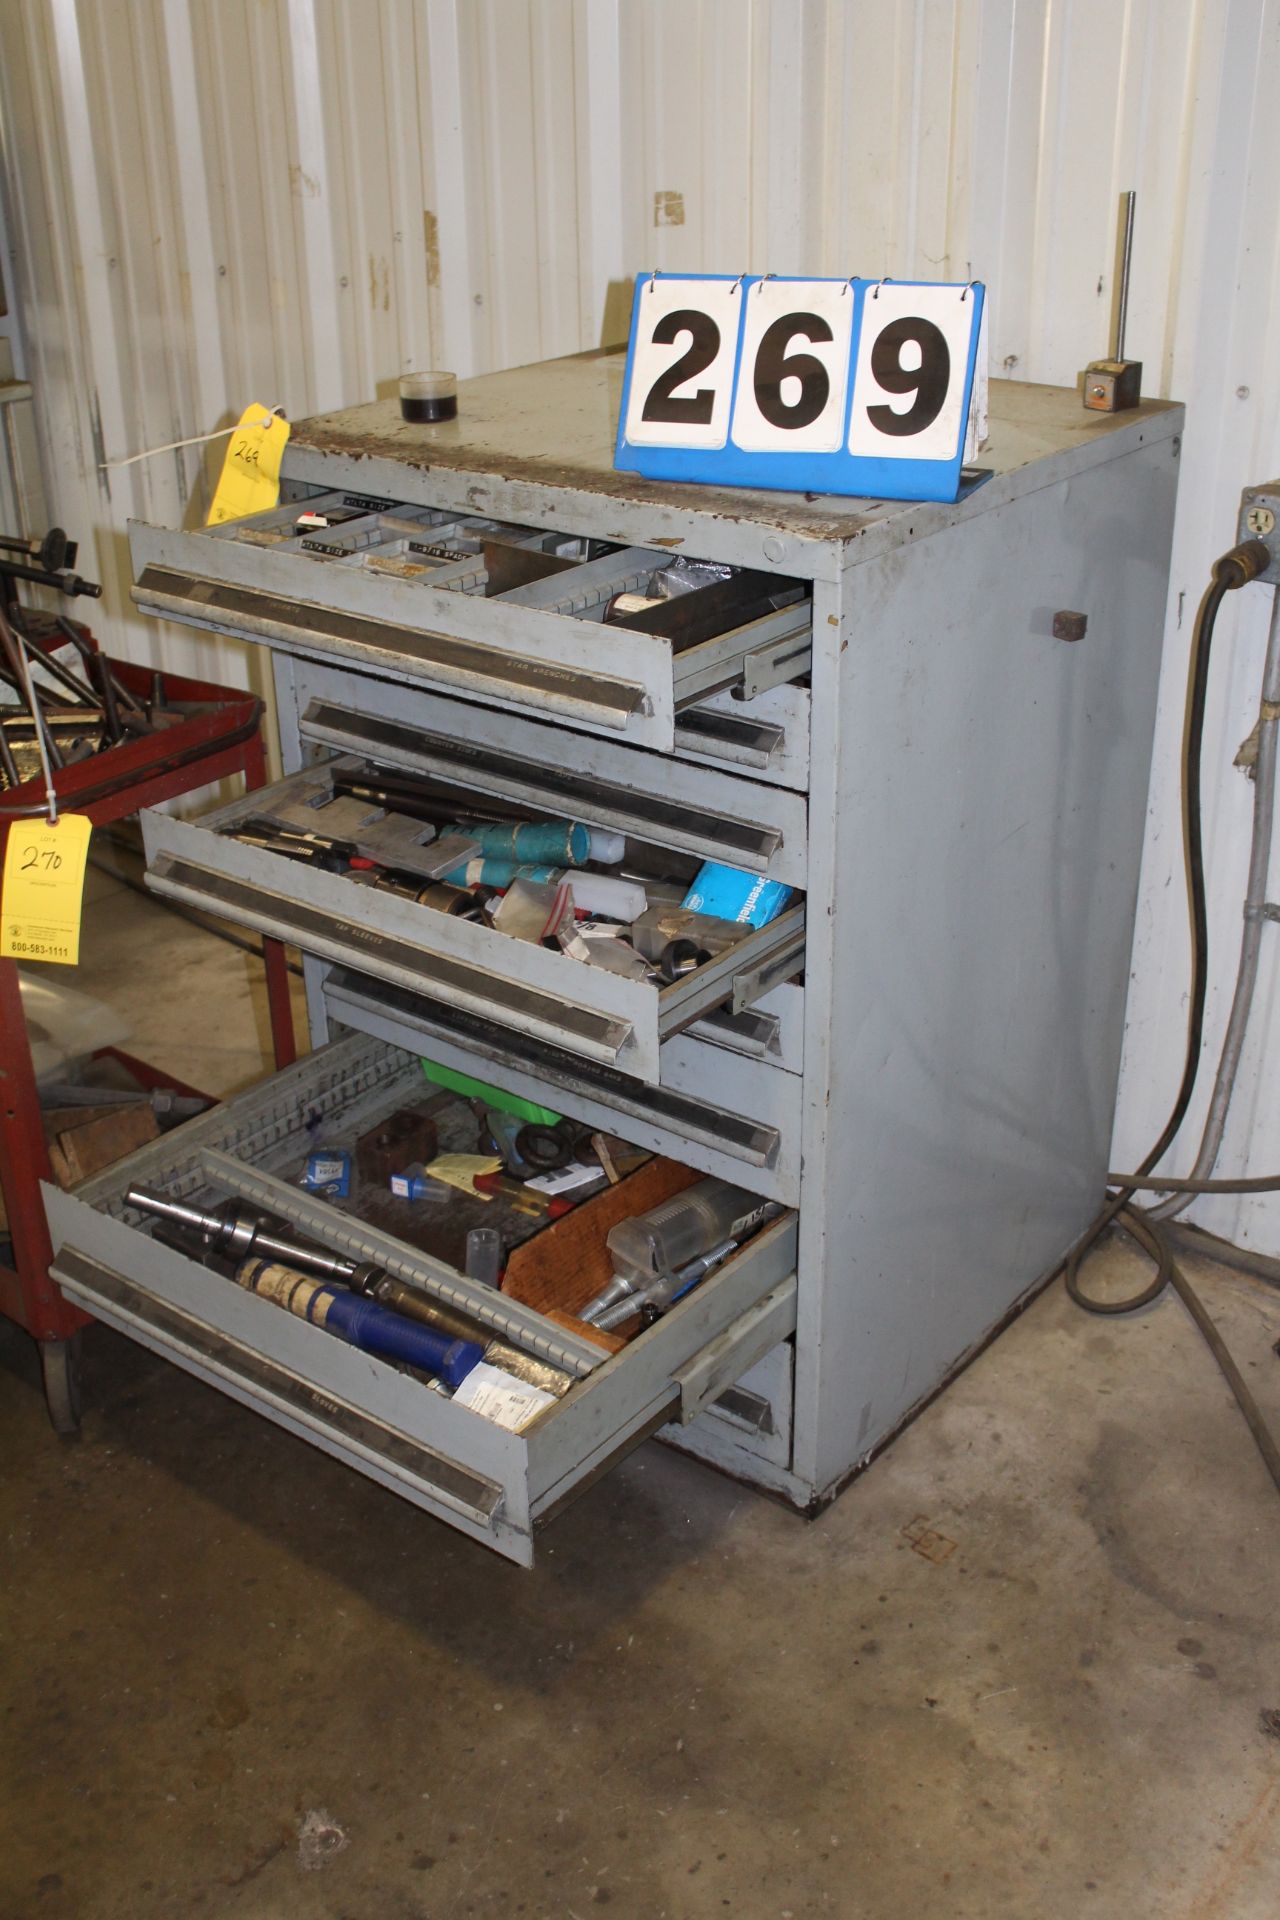 8 DRAWER TOOL CABINETS W/ CONT: INSERTS, DRILL BITS, COLLETS, TAPS, REAMERS, HOLDOWN PARTS